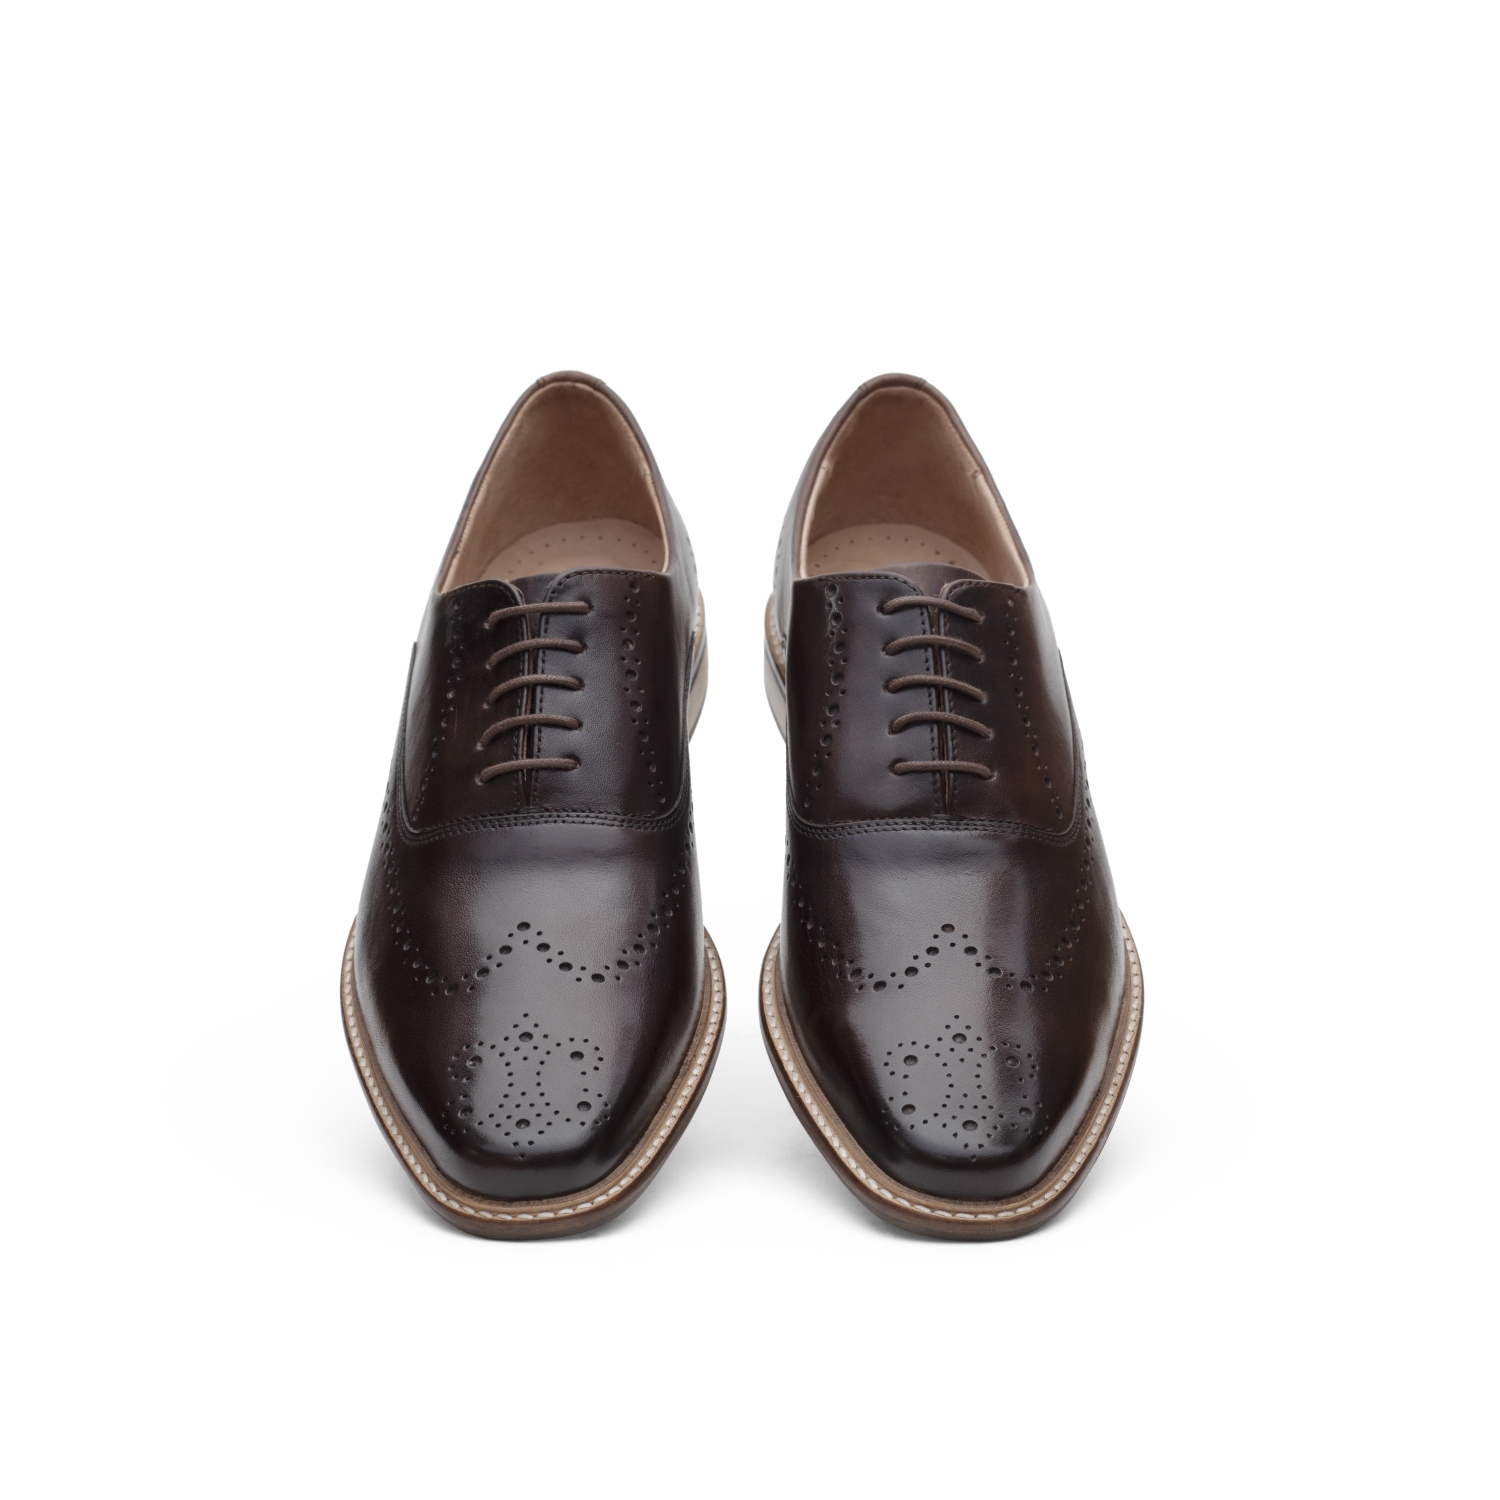 Oxford Formal Brown Shoes - MNJ Shoes - Brand New Shoes and Bags Online ...